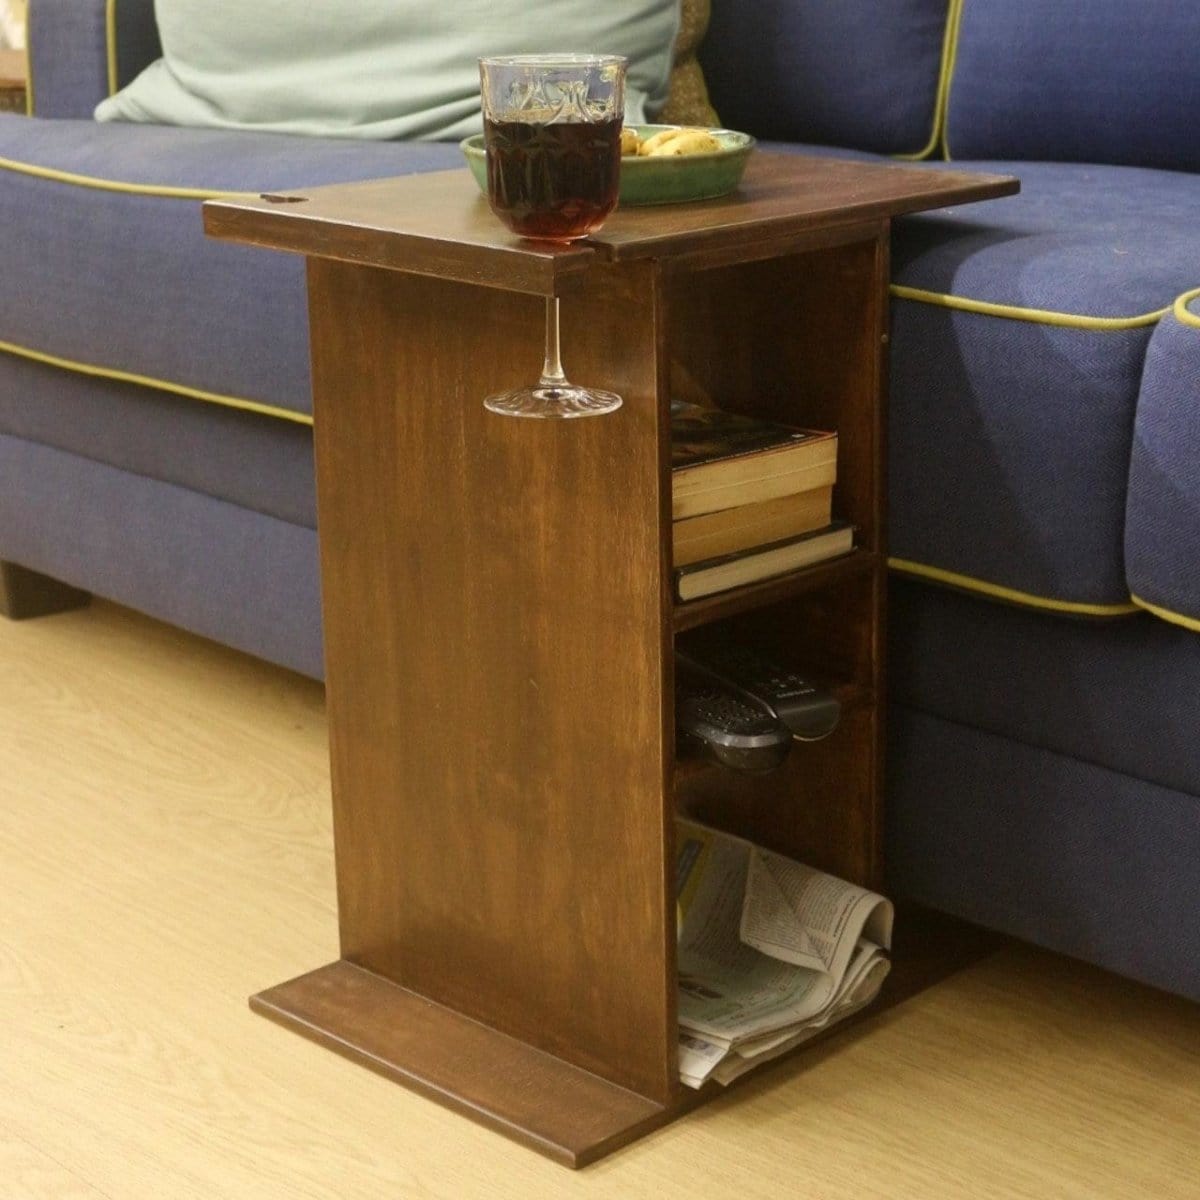 Barish Sofa Table Centre Stand (With Space for your Wine Glass) Walnut BH0003WT Best Home Decor Handcrafted